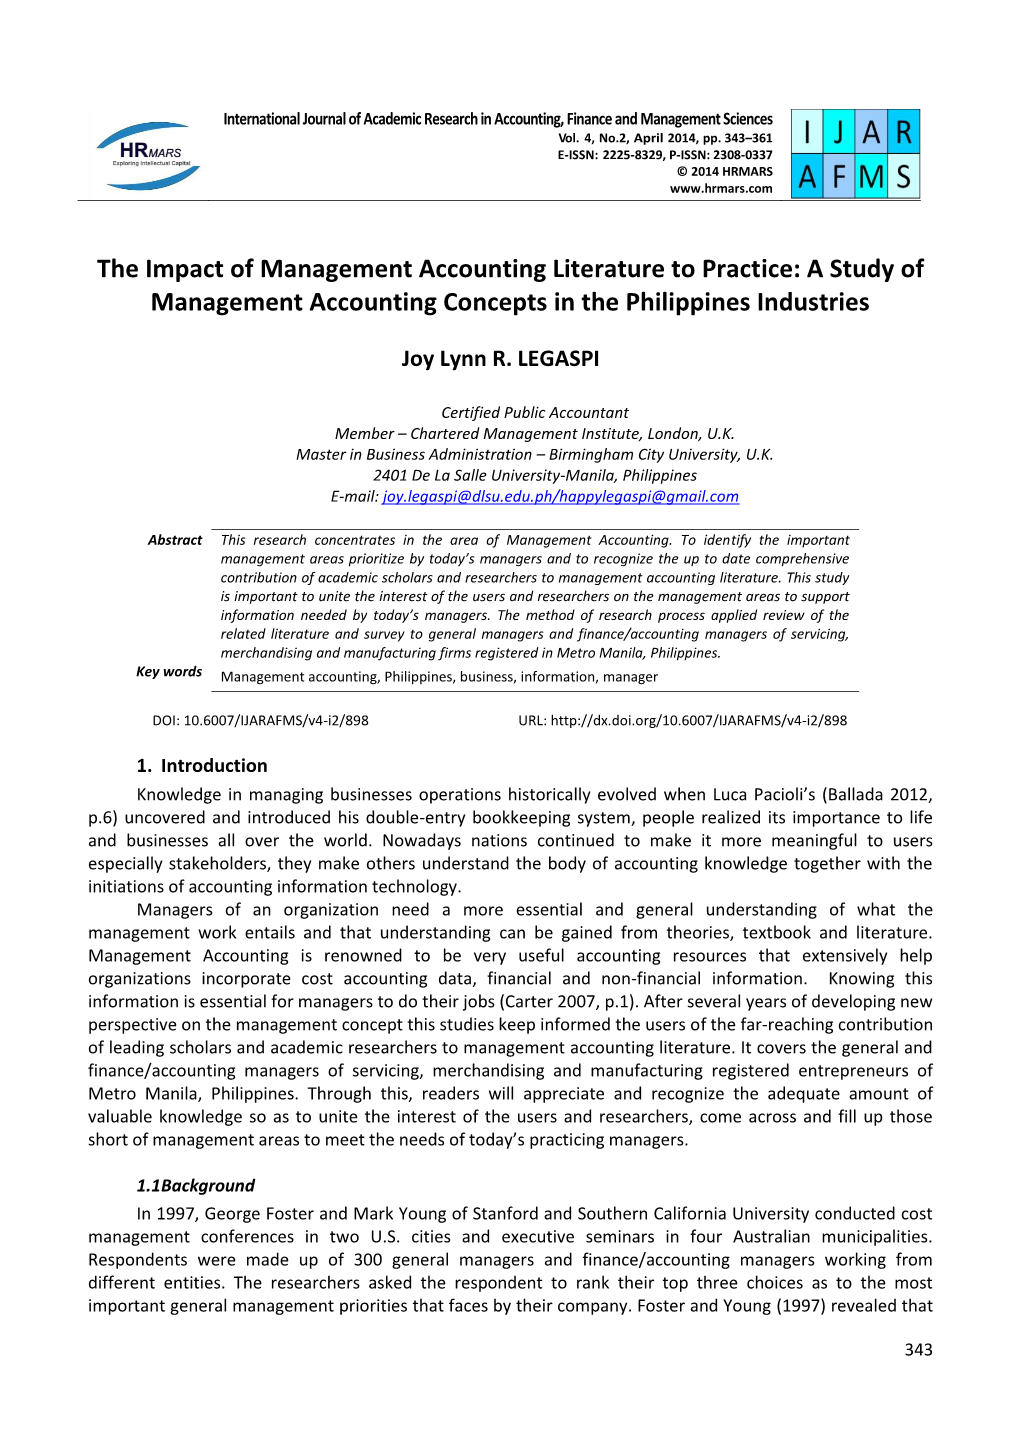 The Impact of Management Accounting Literature to Practice: a Study of Management Accounting Concepts in the Philippines Industries